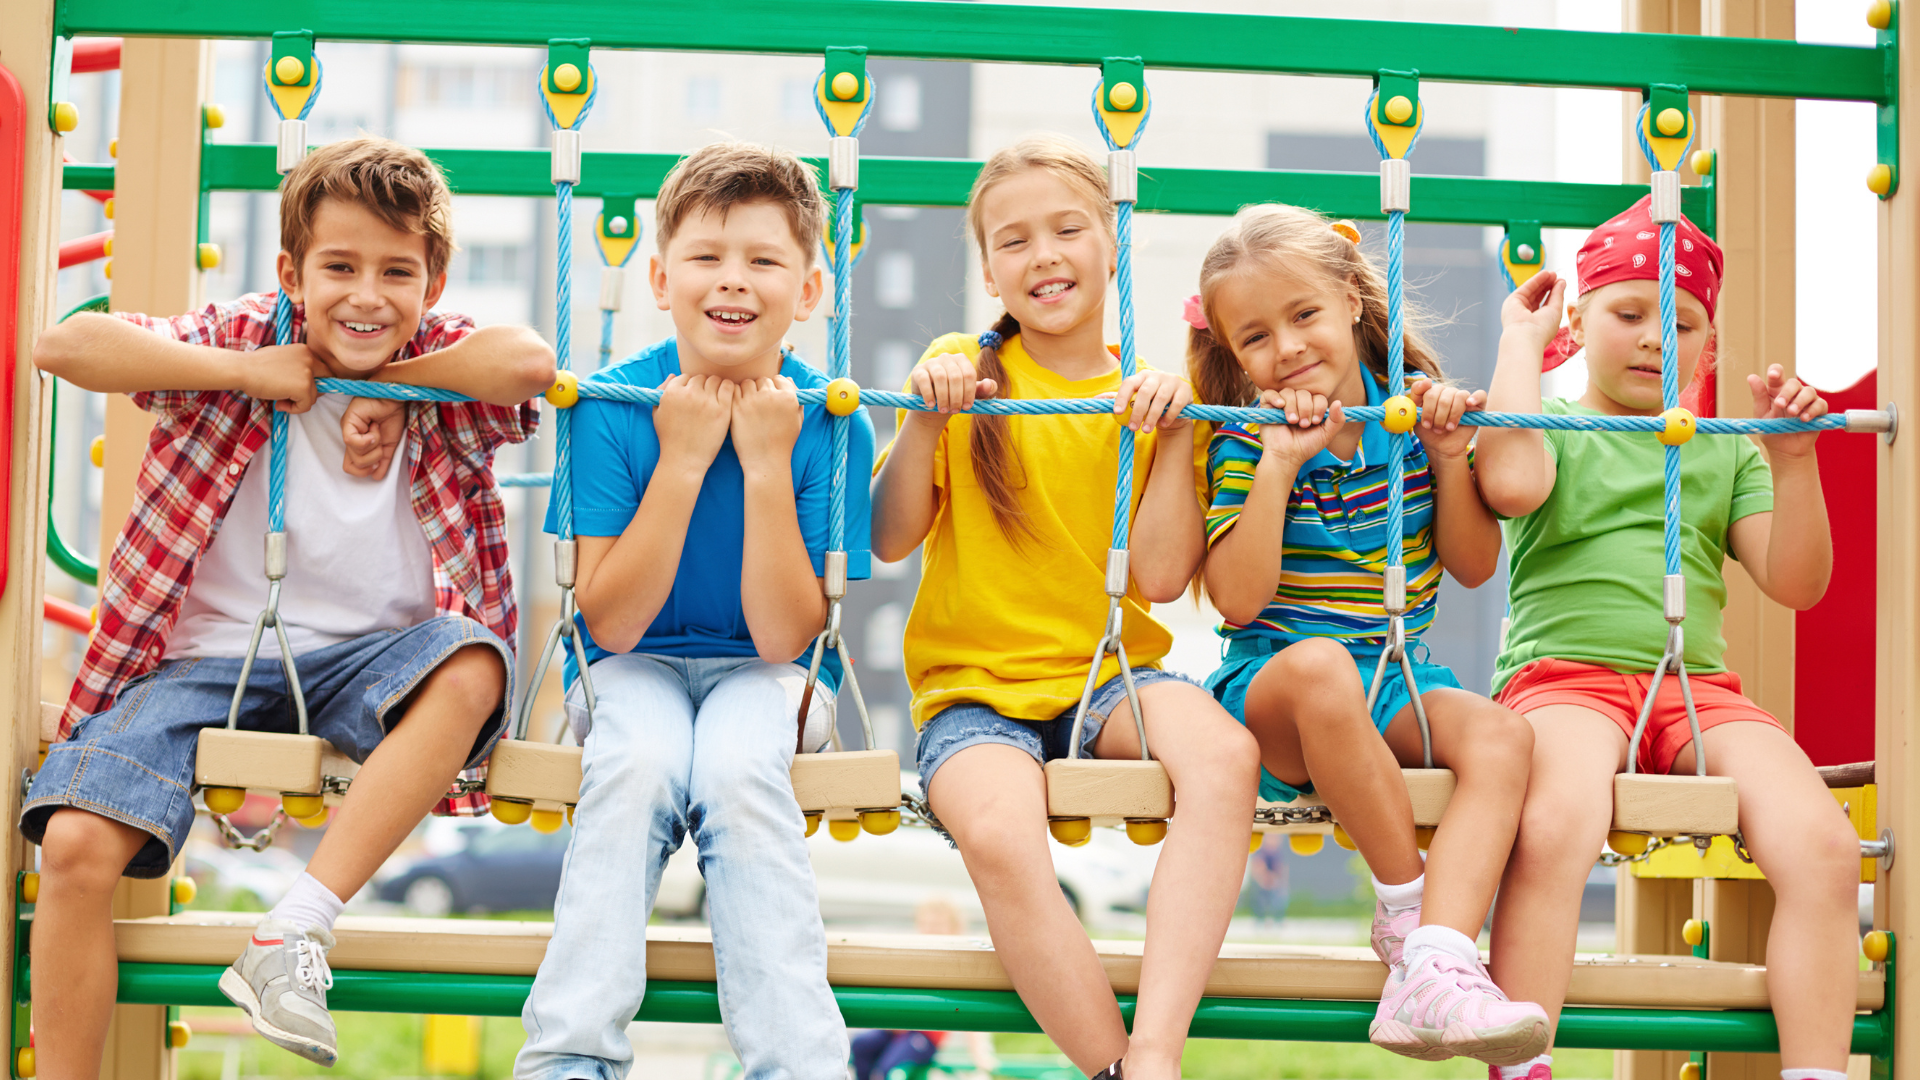 7 Fun Games for the Kids - And They're Free!